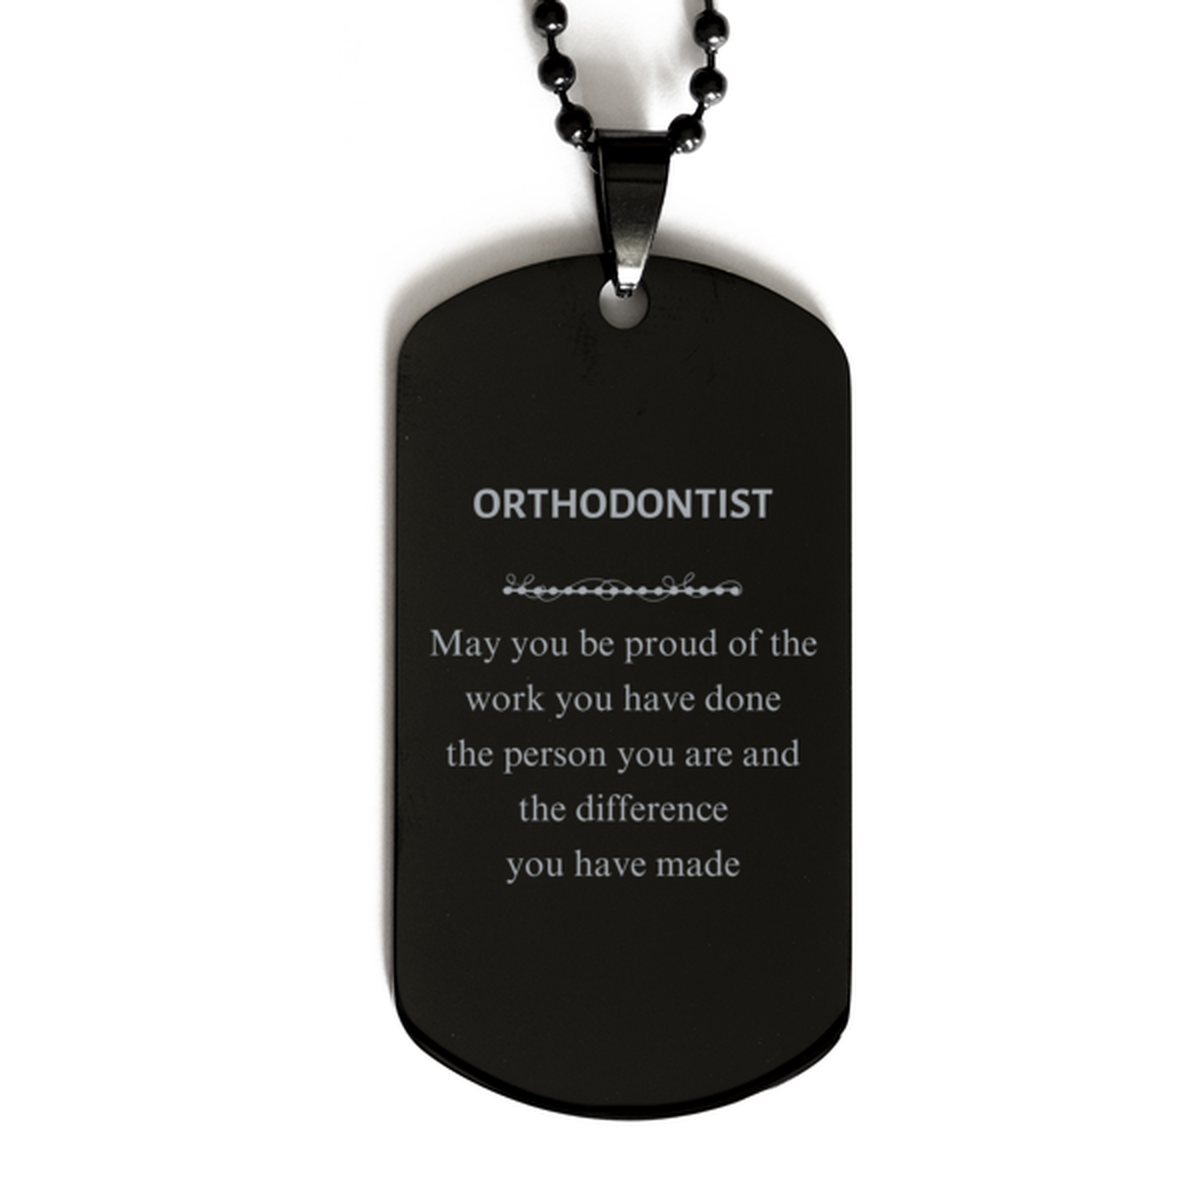 Orthodontist May you be proud of the work you have done, Retirement Orthodontist Black Dog Tag for Colleague Appreciation Gifts Amazing for Orthodontist